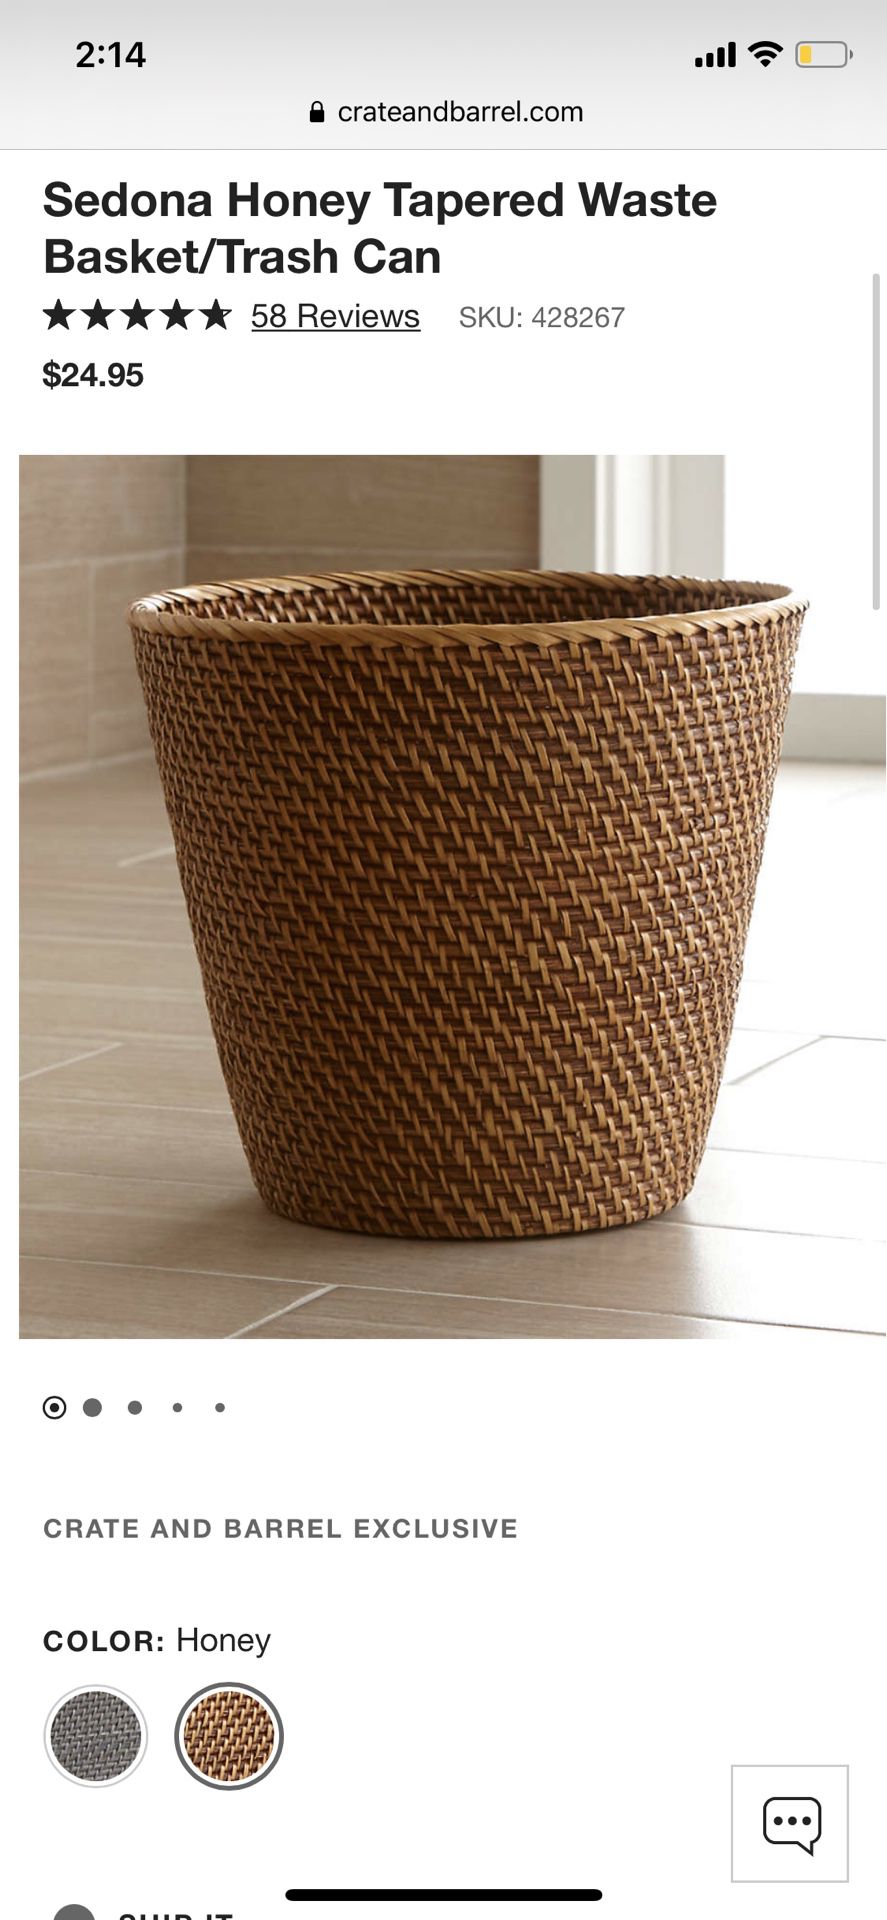 NWT Crate and Barrel Sedona Honey Tapered Waste Basket/Trash Can